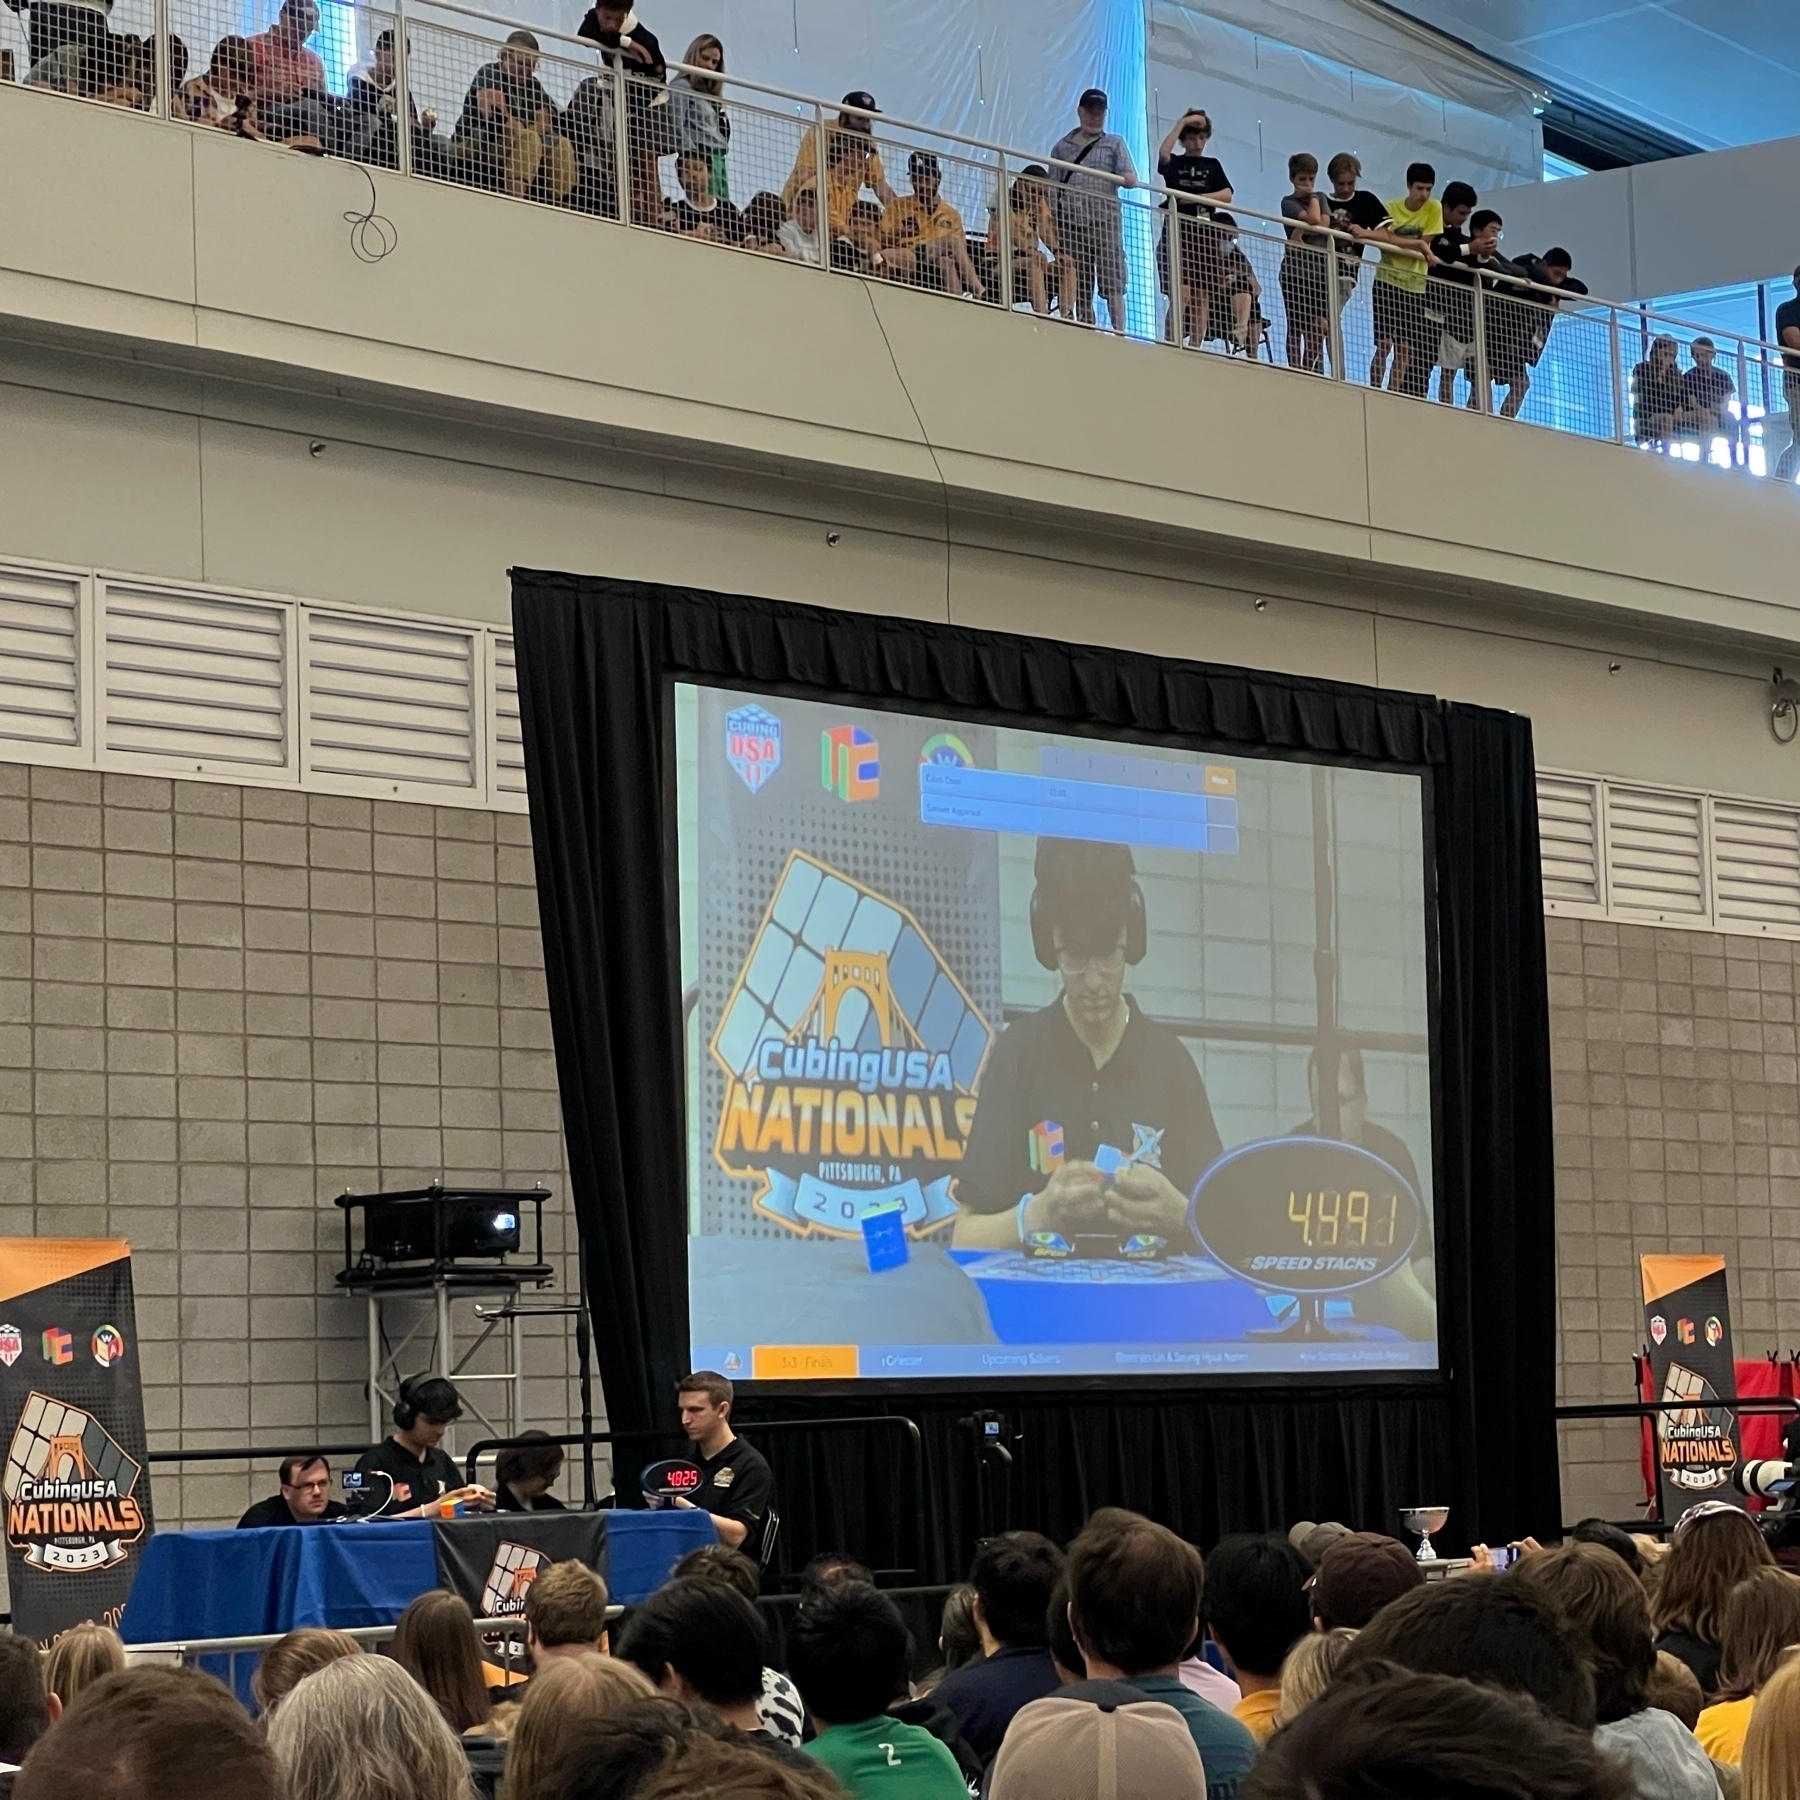 stage at us national speed cubing competition with large display behind